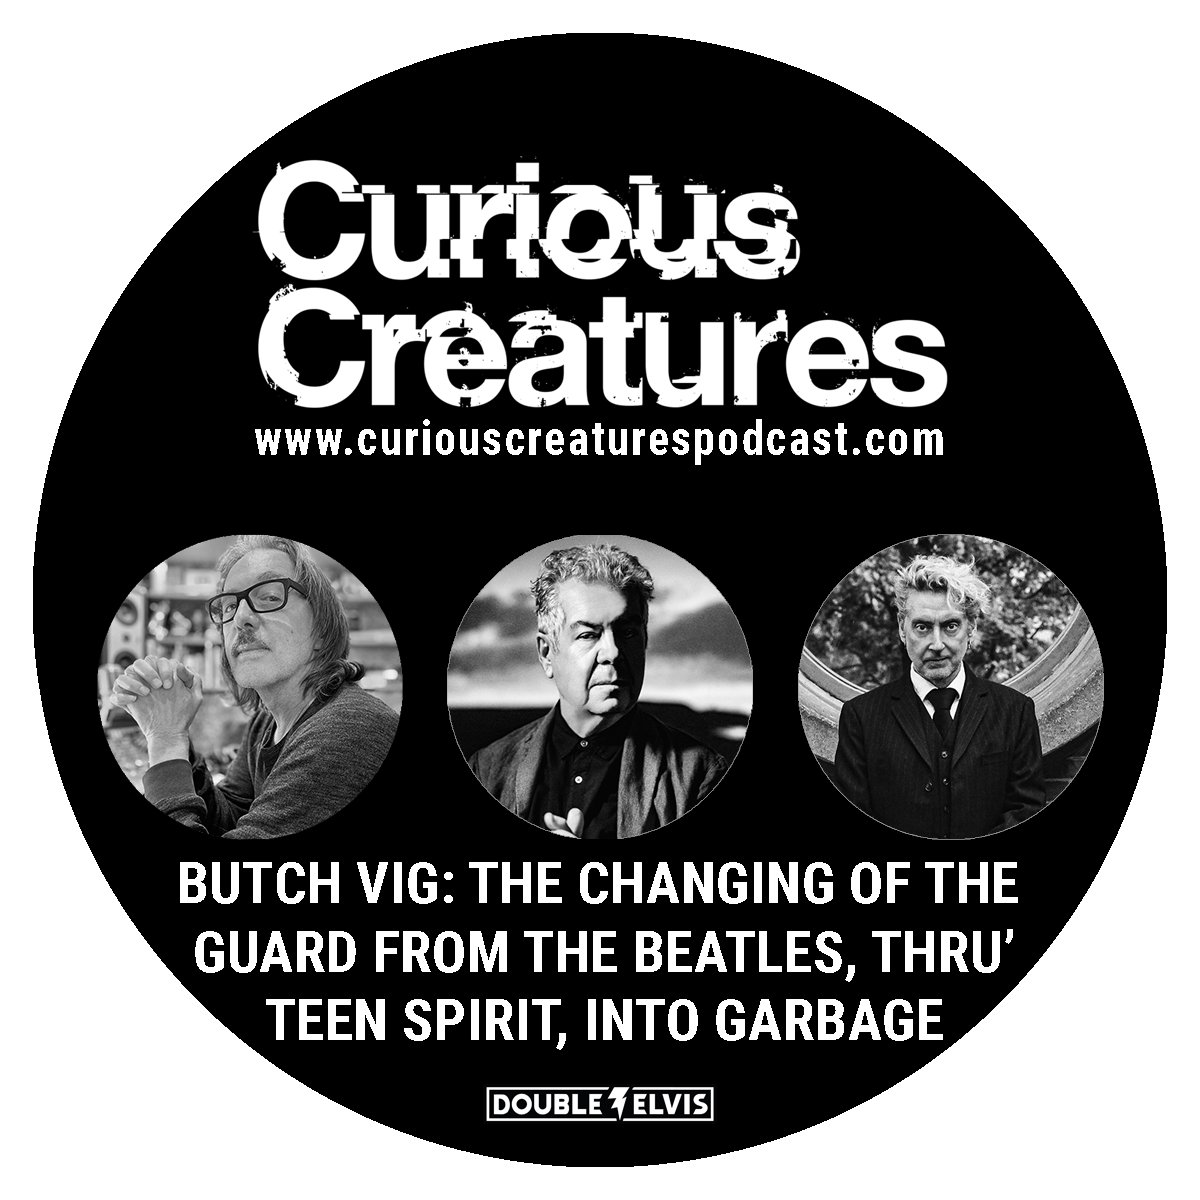 This week on @curecreatures we're talking with Garbage drummer and legendary producer Butch Vig. Find this week's episode - Butch Vig: The Changing of The Guard From The Beatles, thru’ Teen Spirit, into Garbage - wherever you get your podcasts.